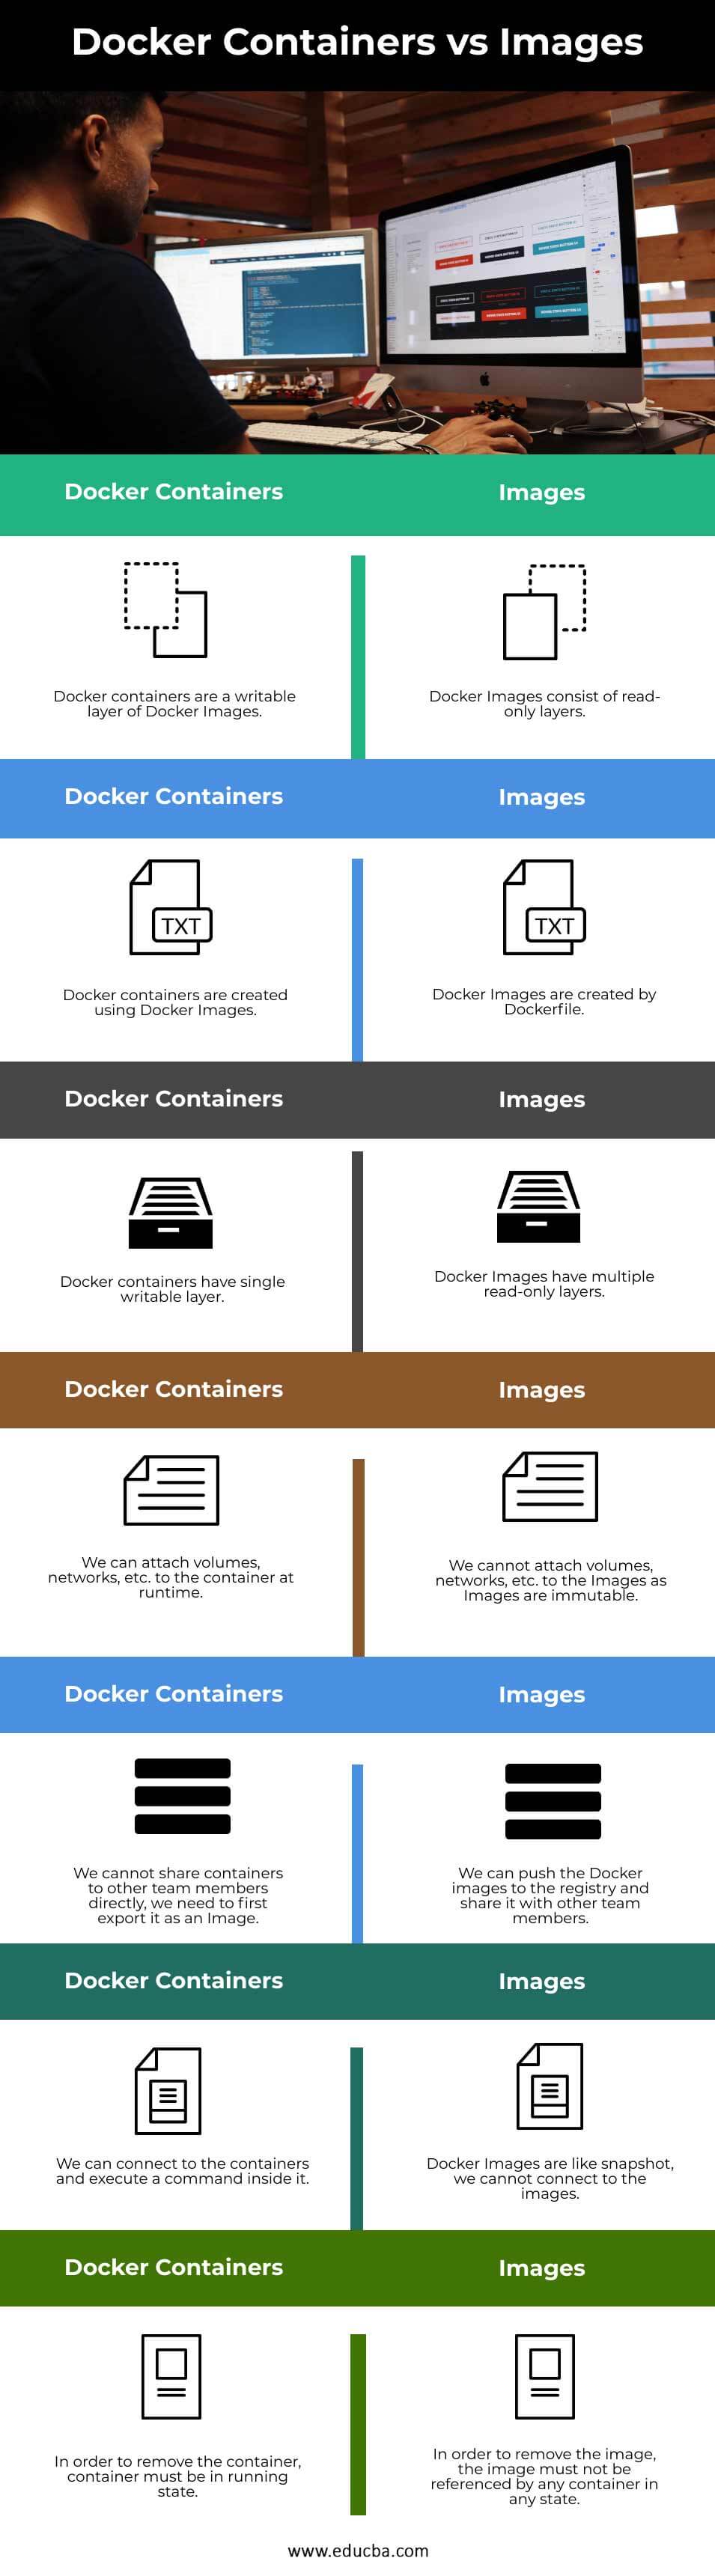 Docker-Containers-vs-Images-info